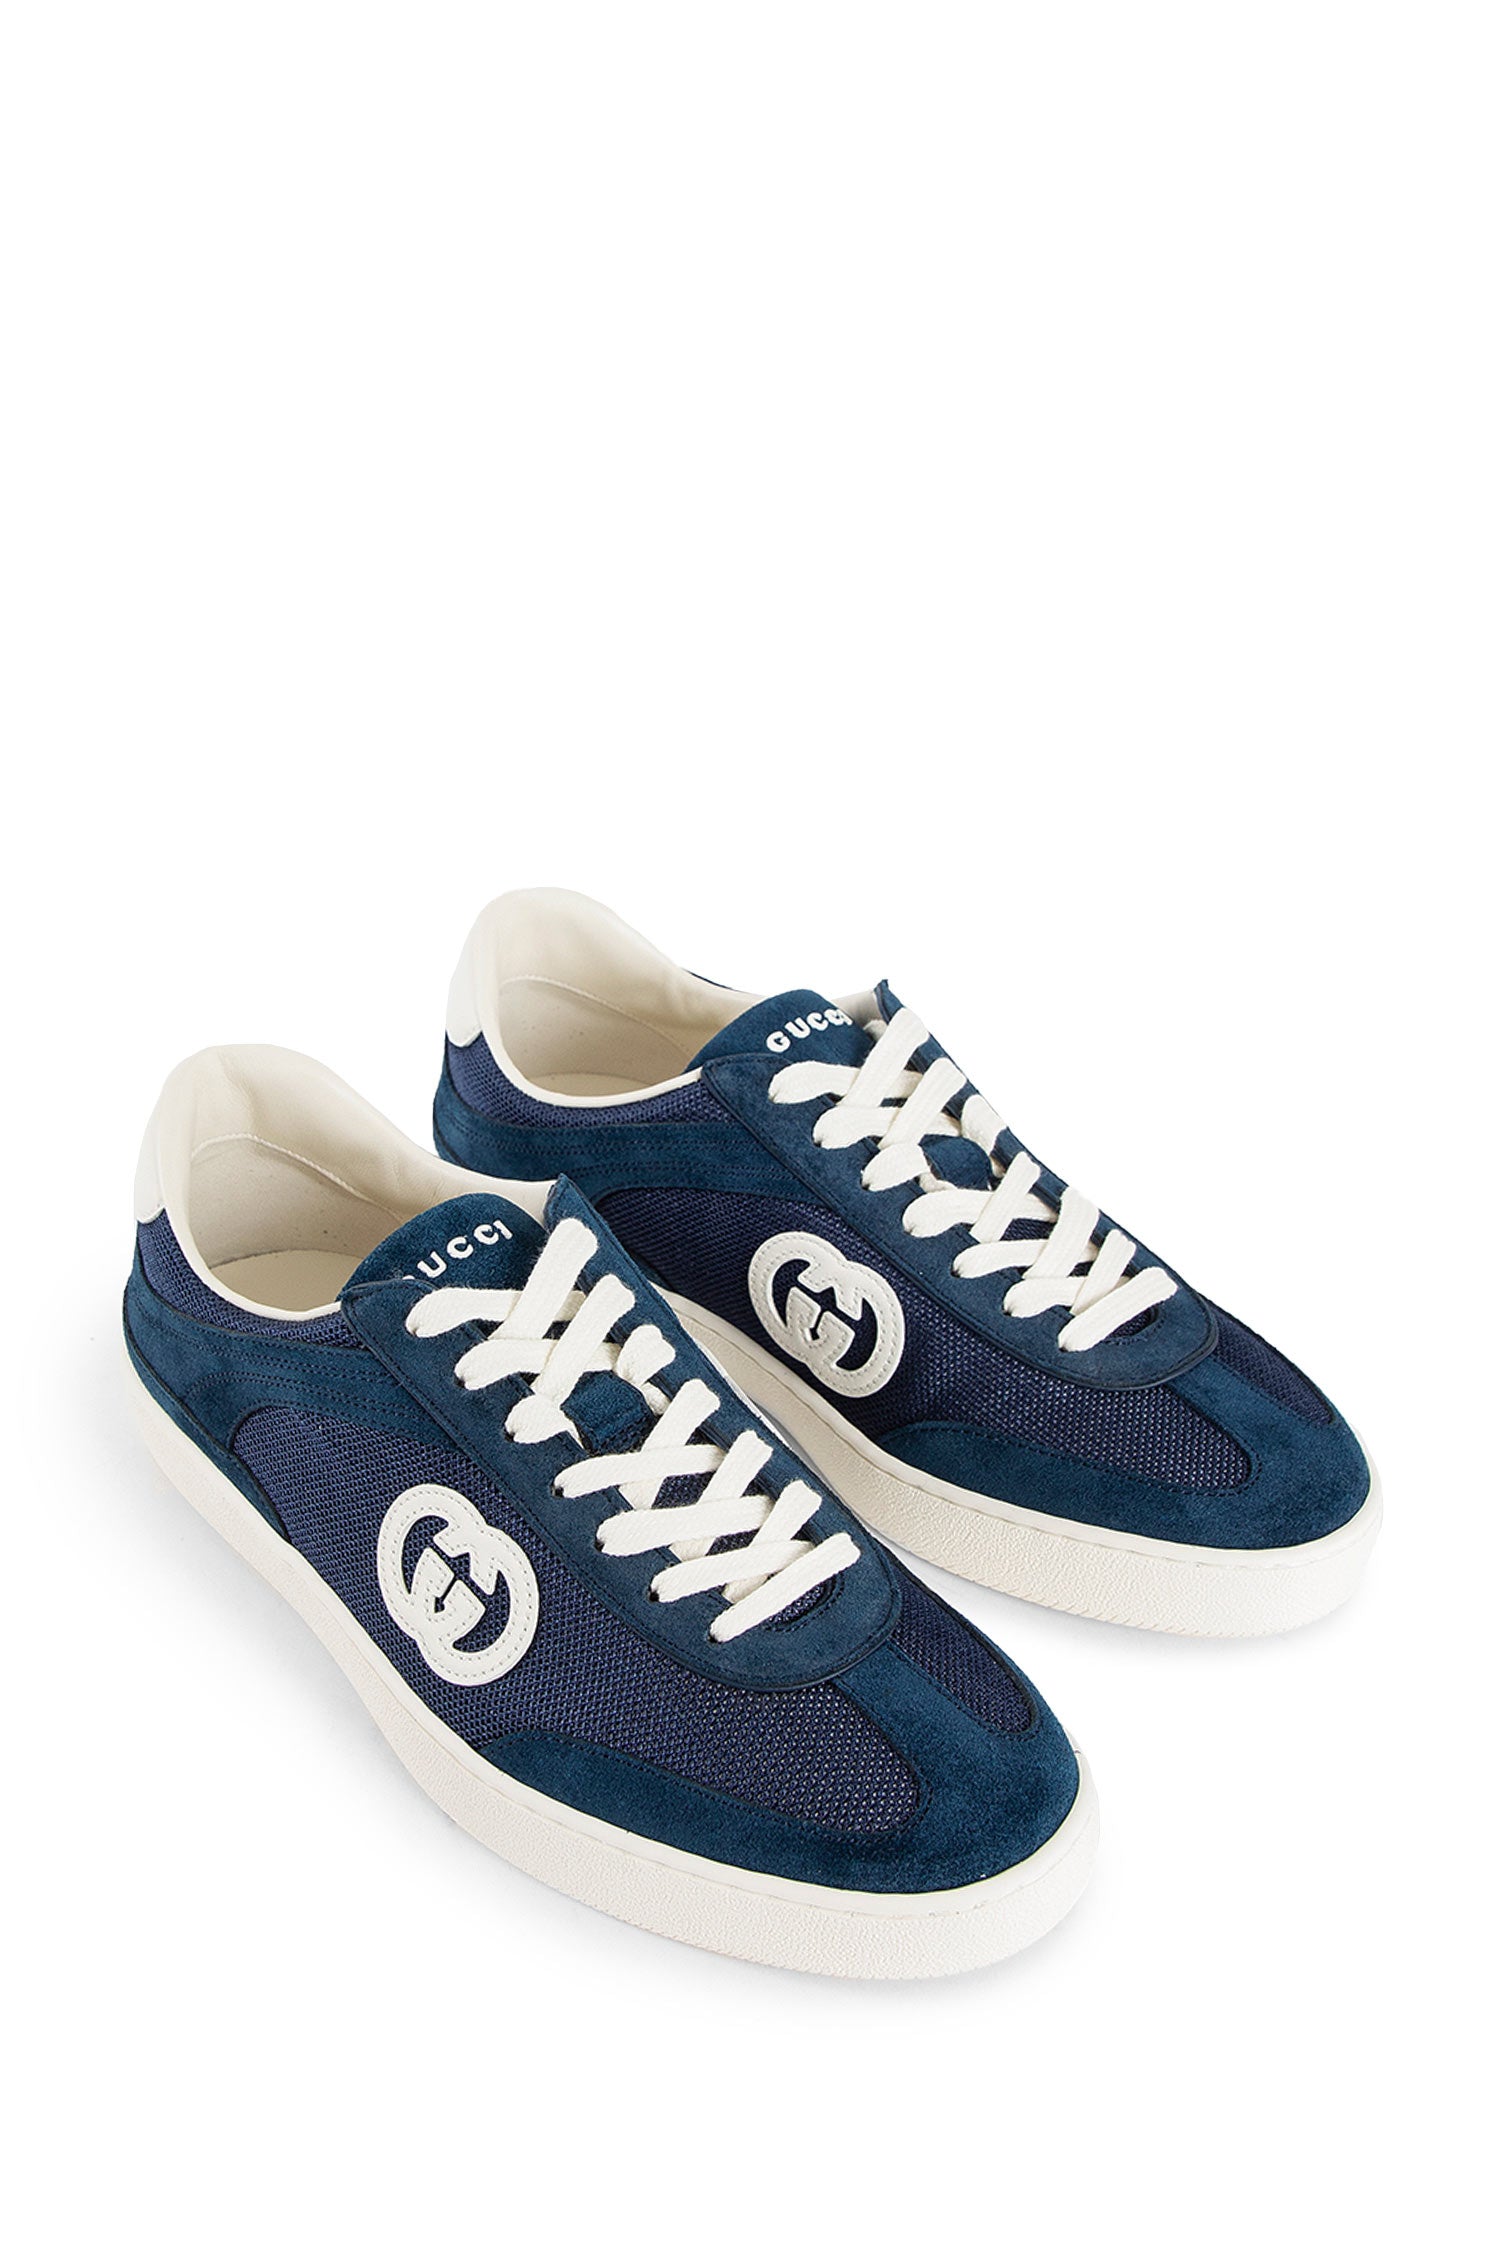 GUCCI MAN BLUE SNEAKERS